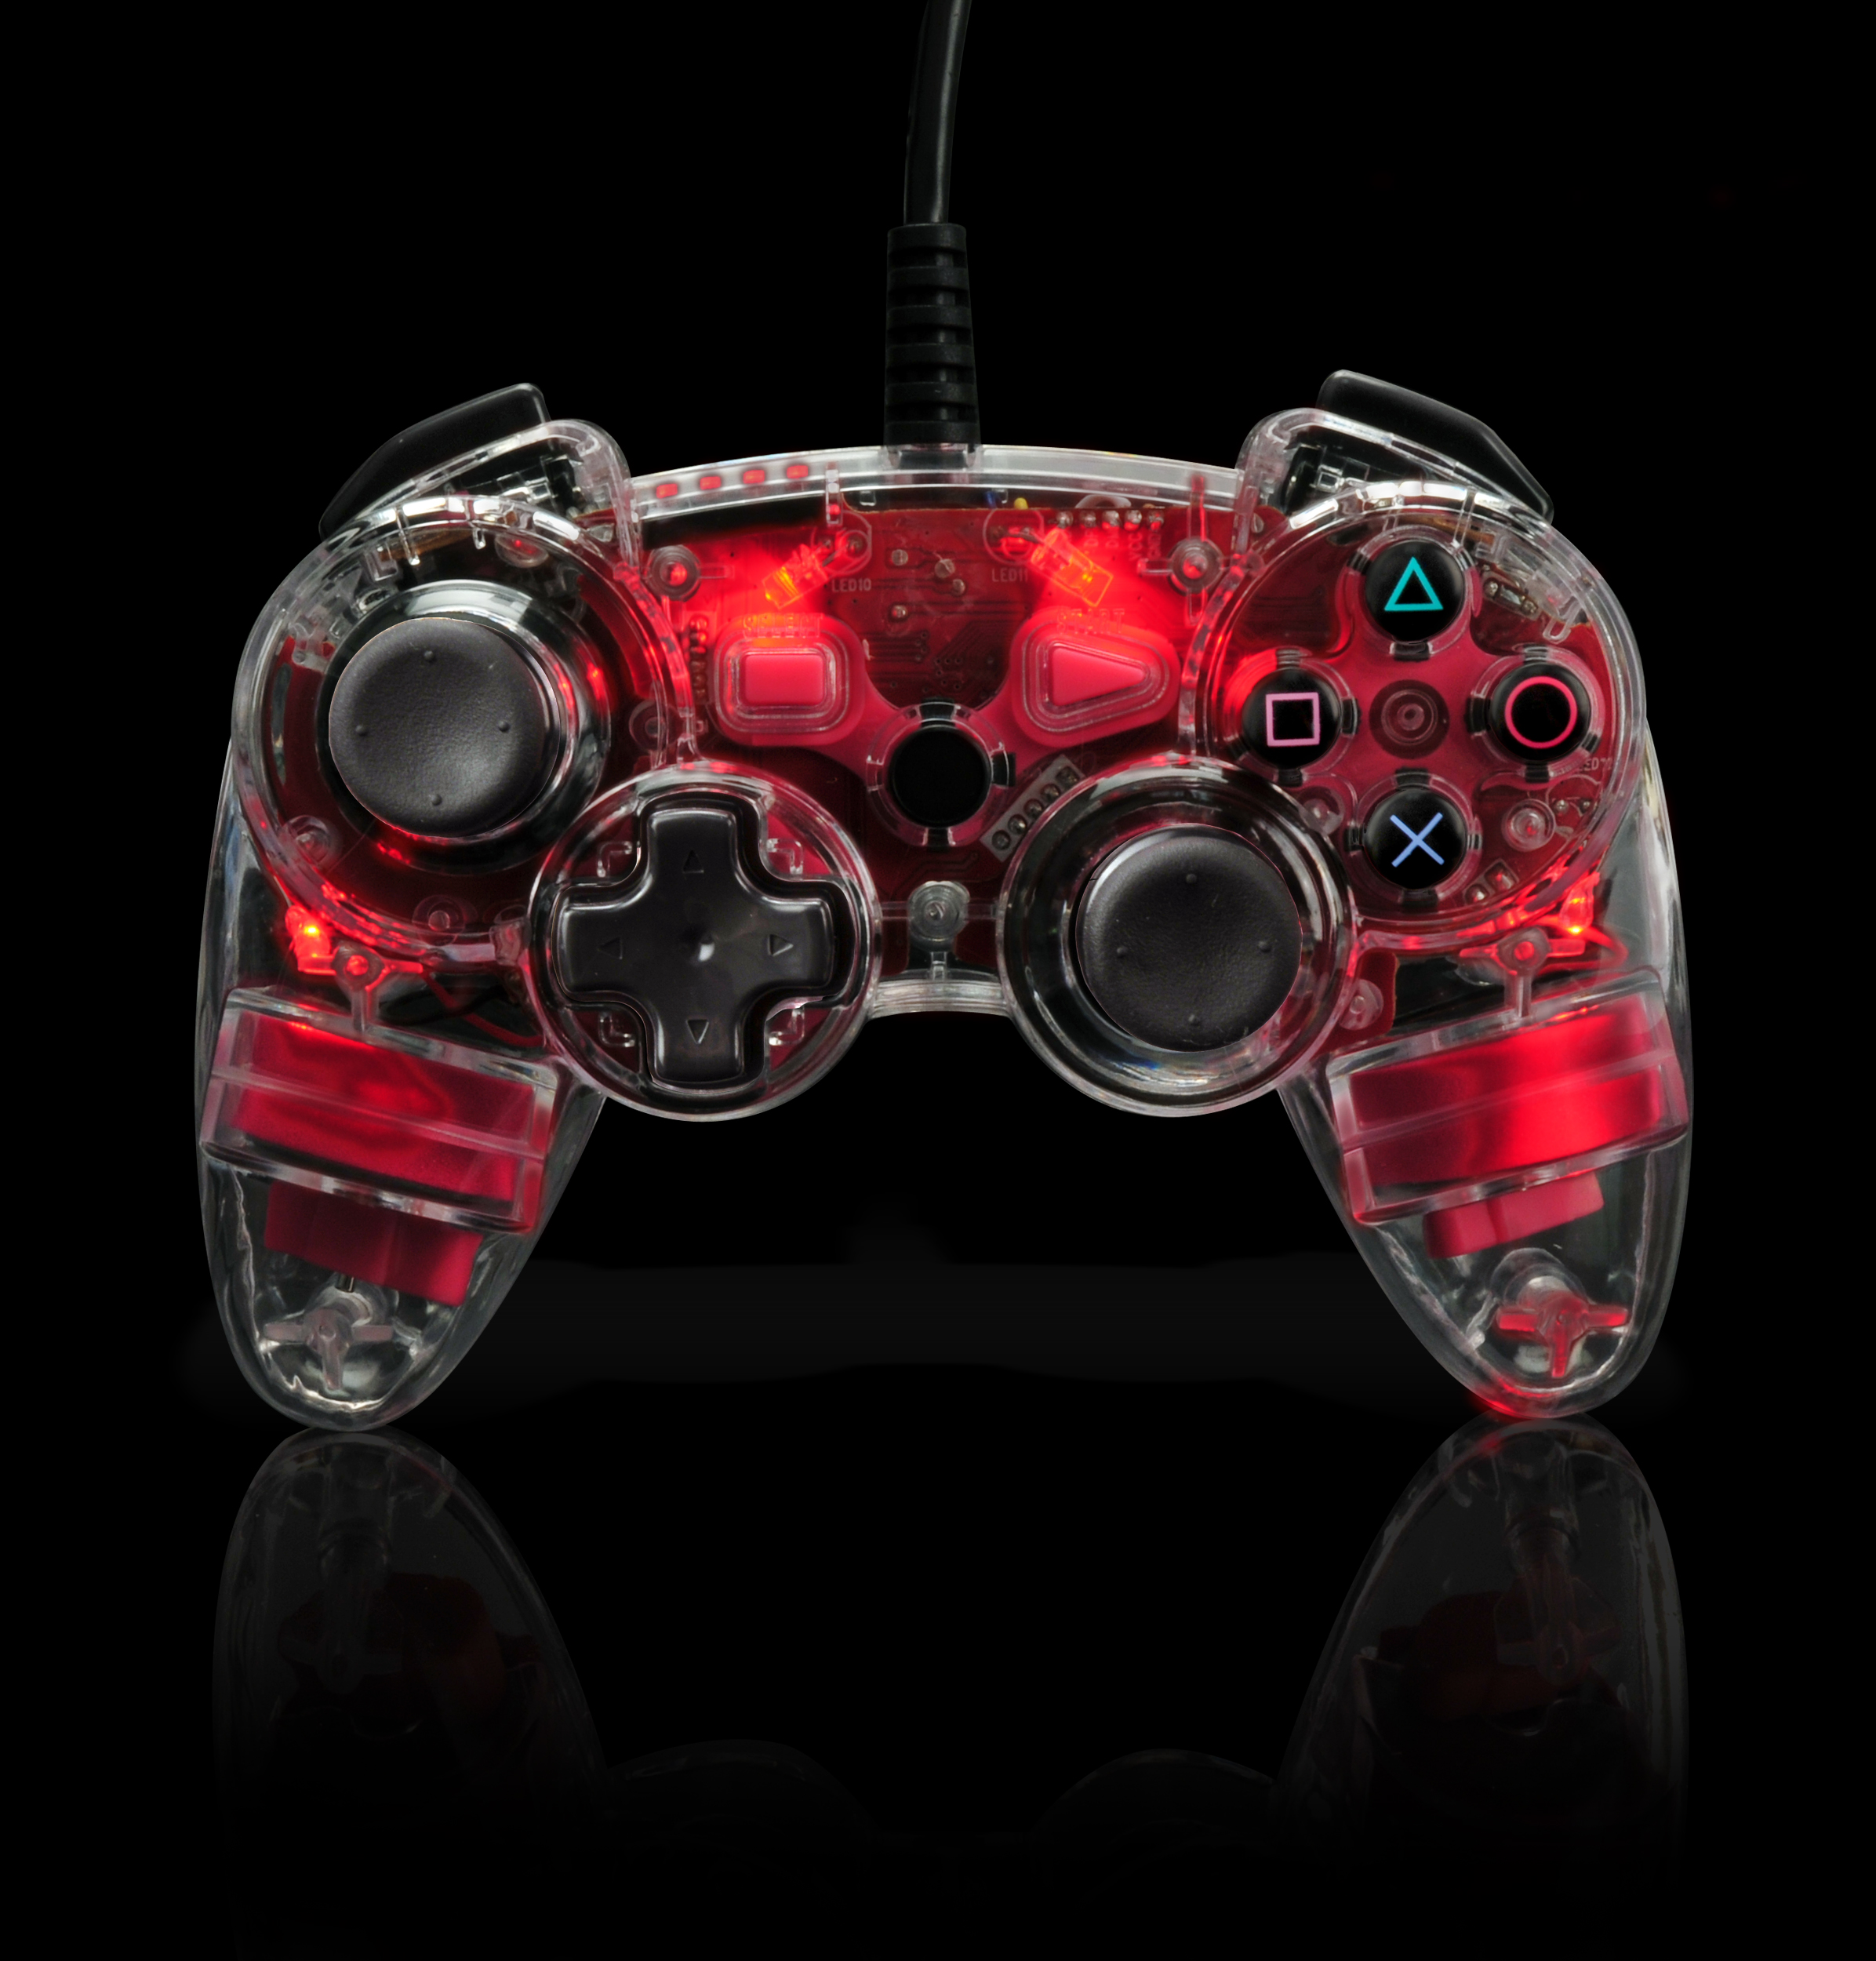 afterglow ps3 controller on pc